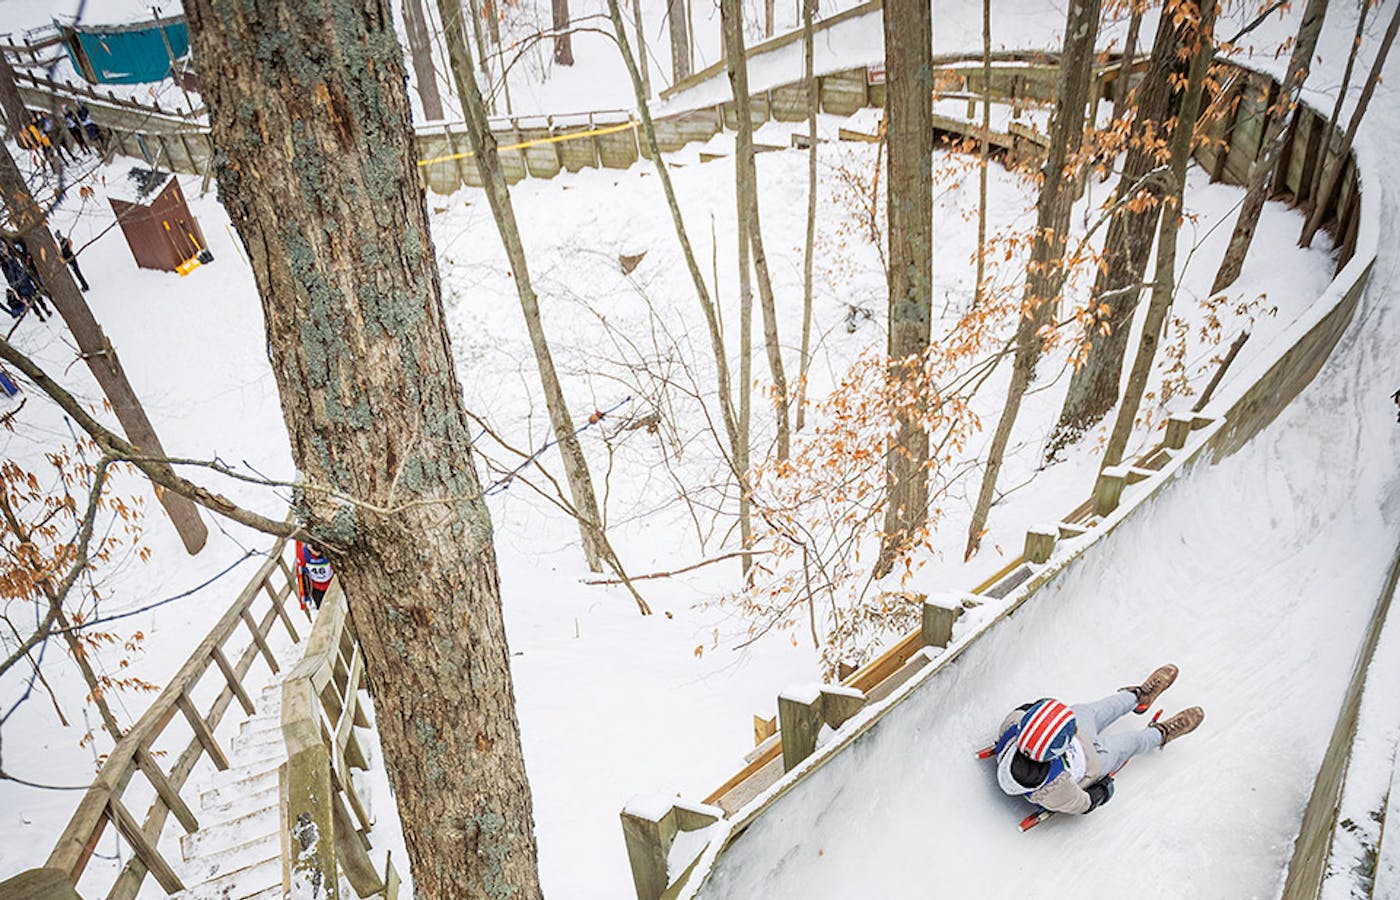 Person riding down luge at Muskegon Luge Adventure Sports Park in Muskegon, Michigan (photo by Adam Alexander Photography)